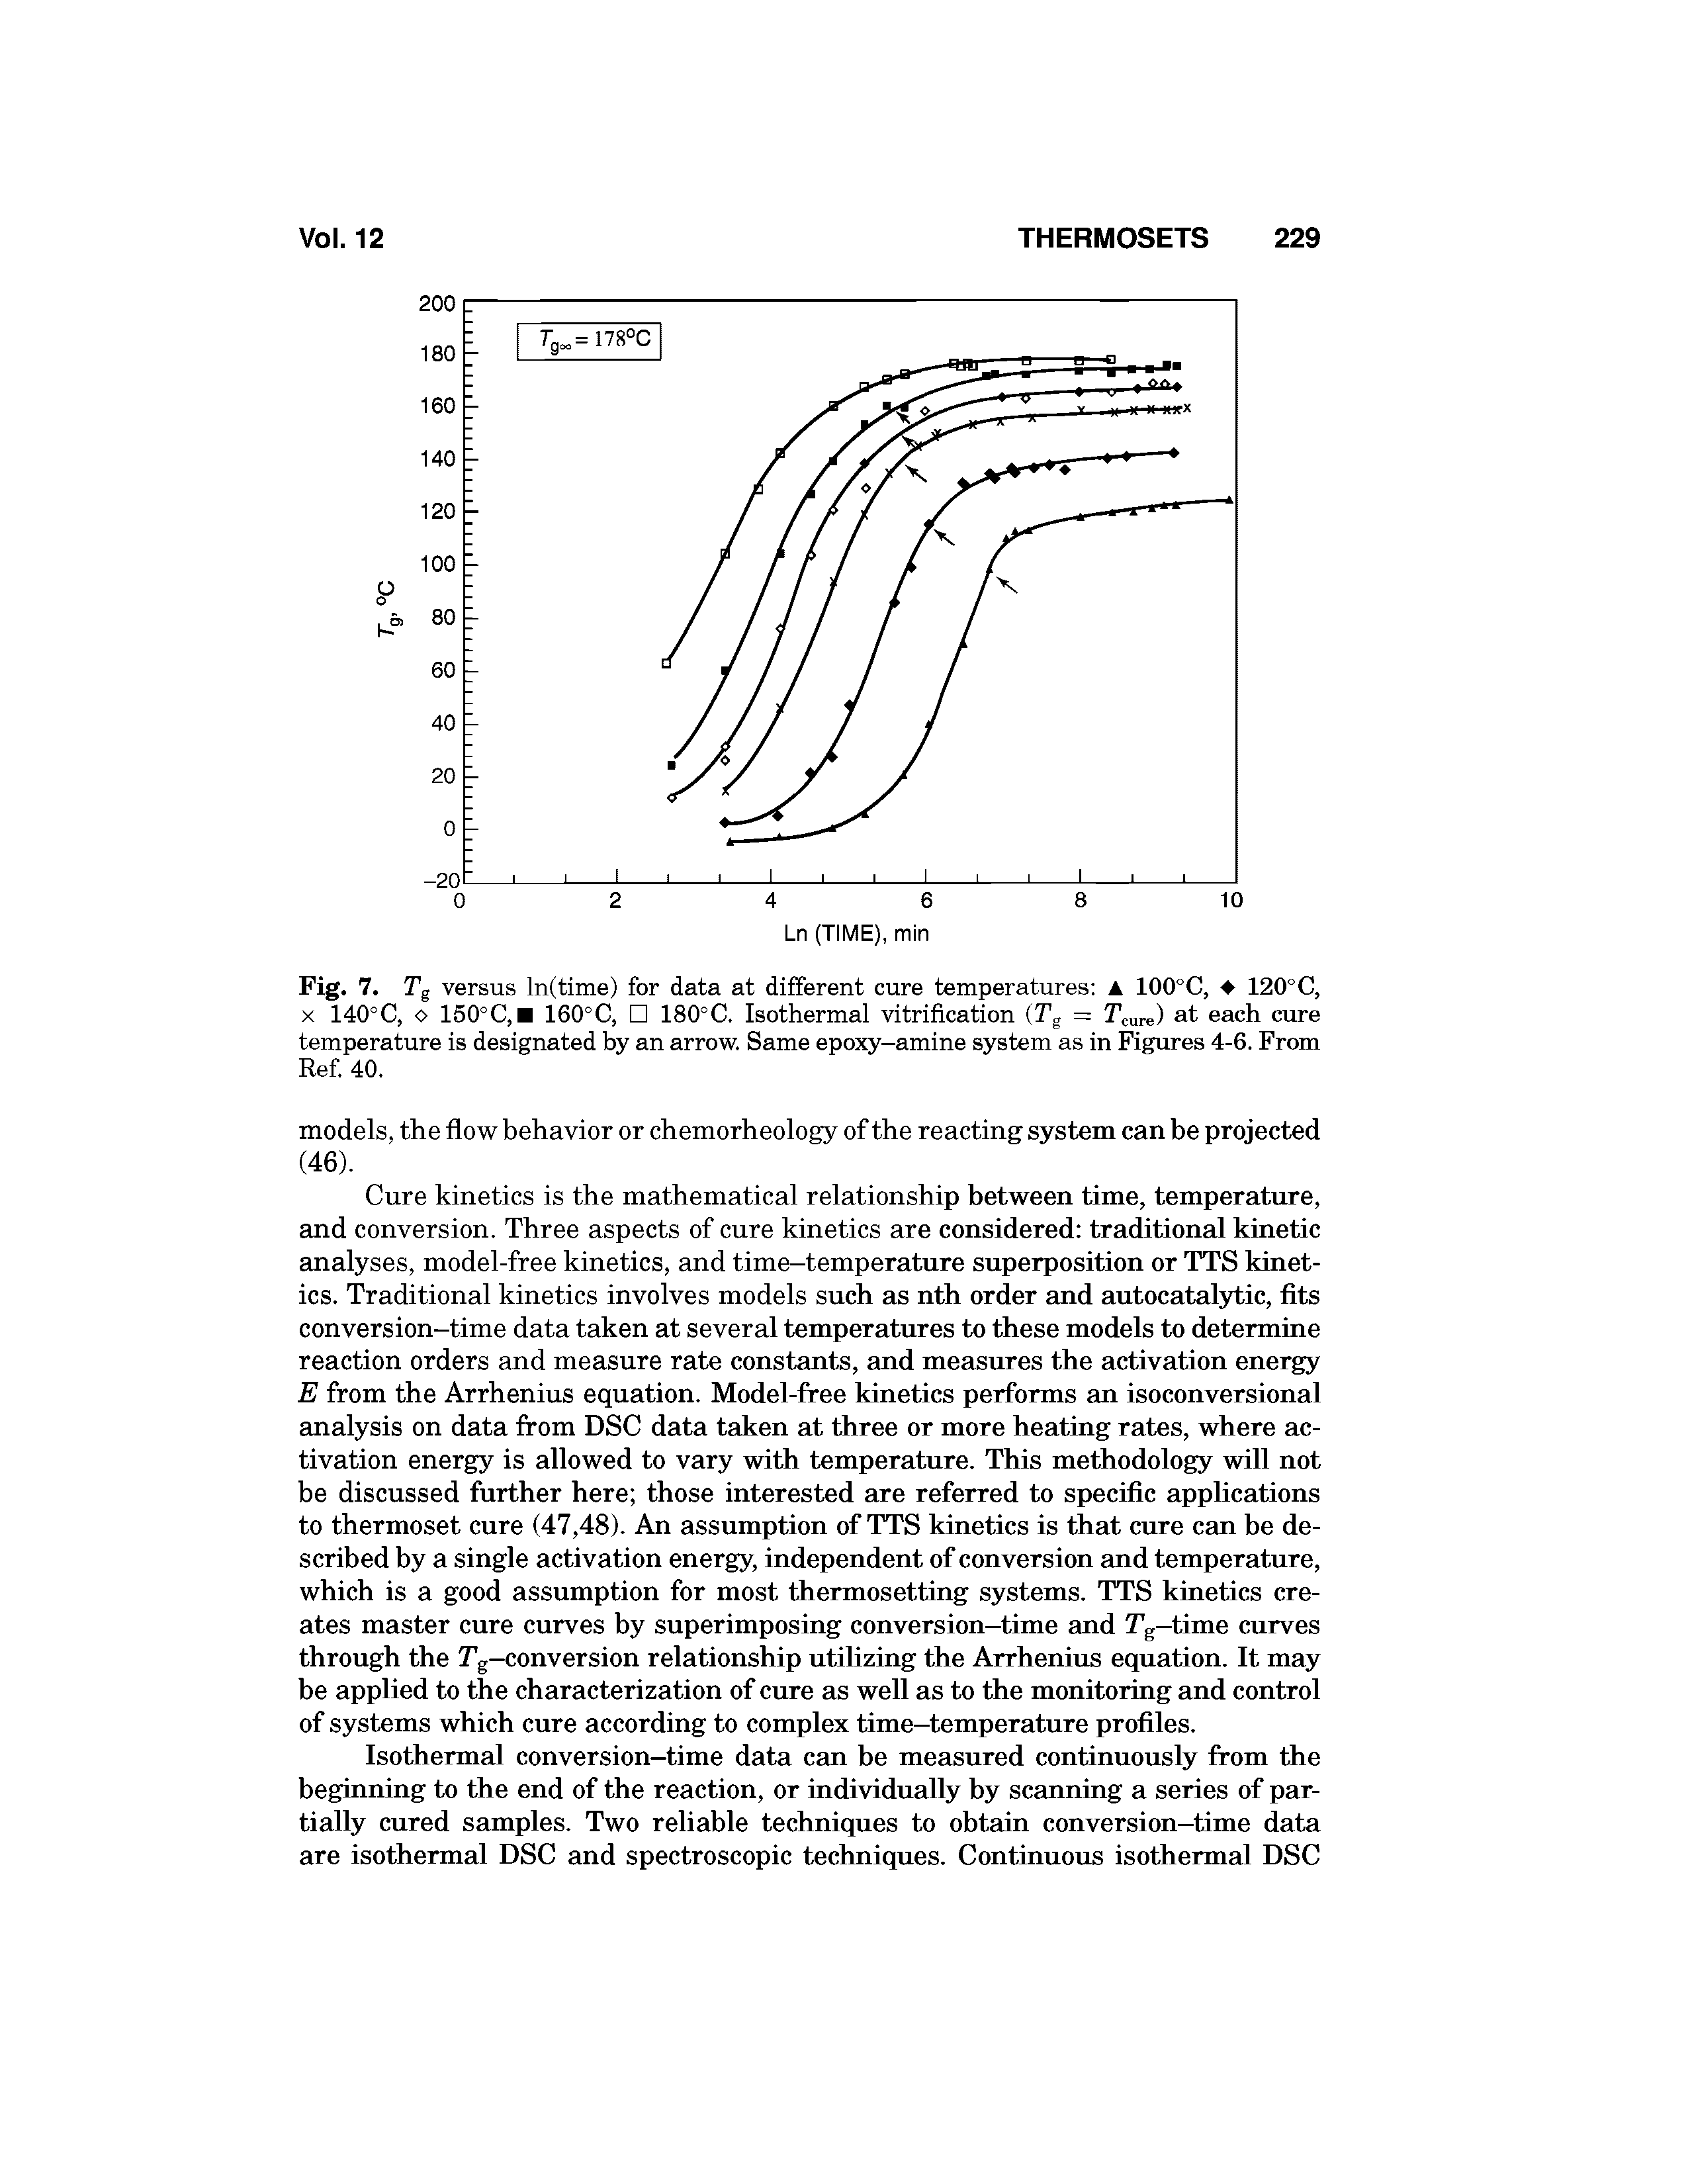 Fig. 7. Tg versus In(time) for data at different cure temperatures A 100°C, 120°C, X 140°C, o 150°C,B 160°C, 180°C. Isothermal vitrification (Tg = T are) at each cure temperature is designated by an arrow. Same epoxy-amine system as in Figures 4-6. From Ref 40.